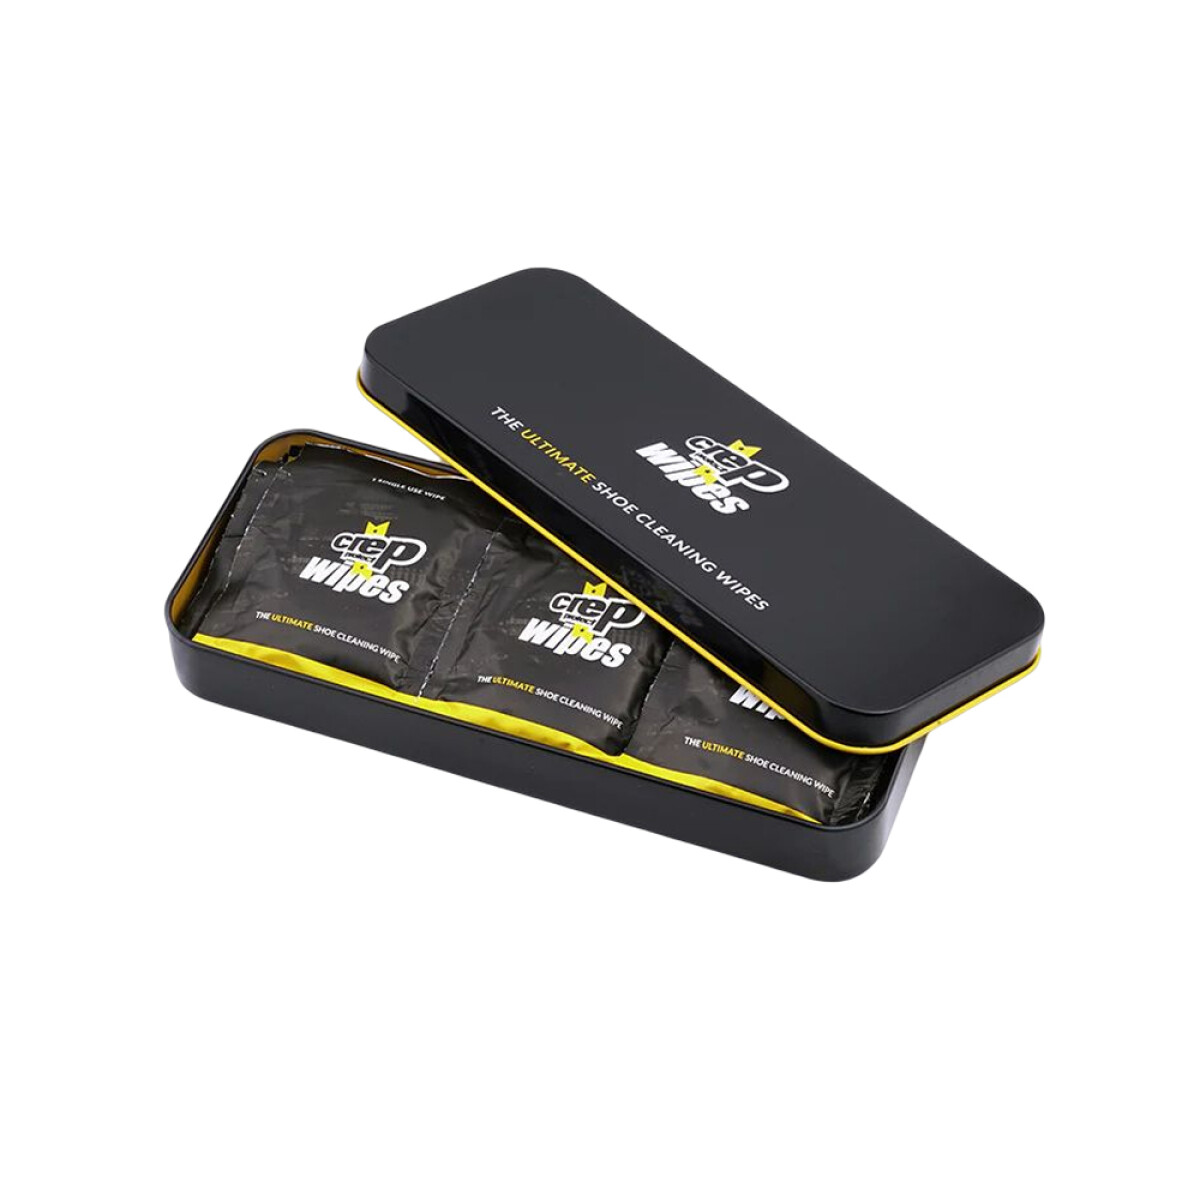 CREP PROTECT WIPES PACKS - 000 